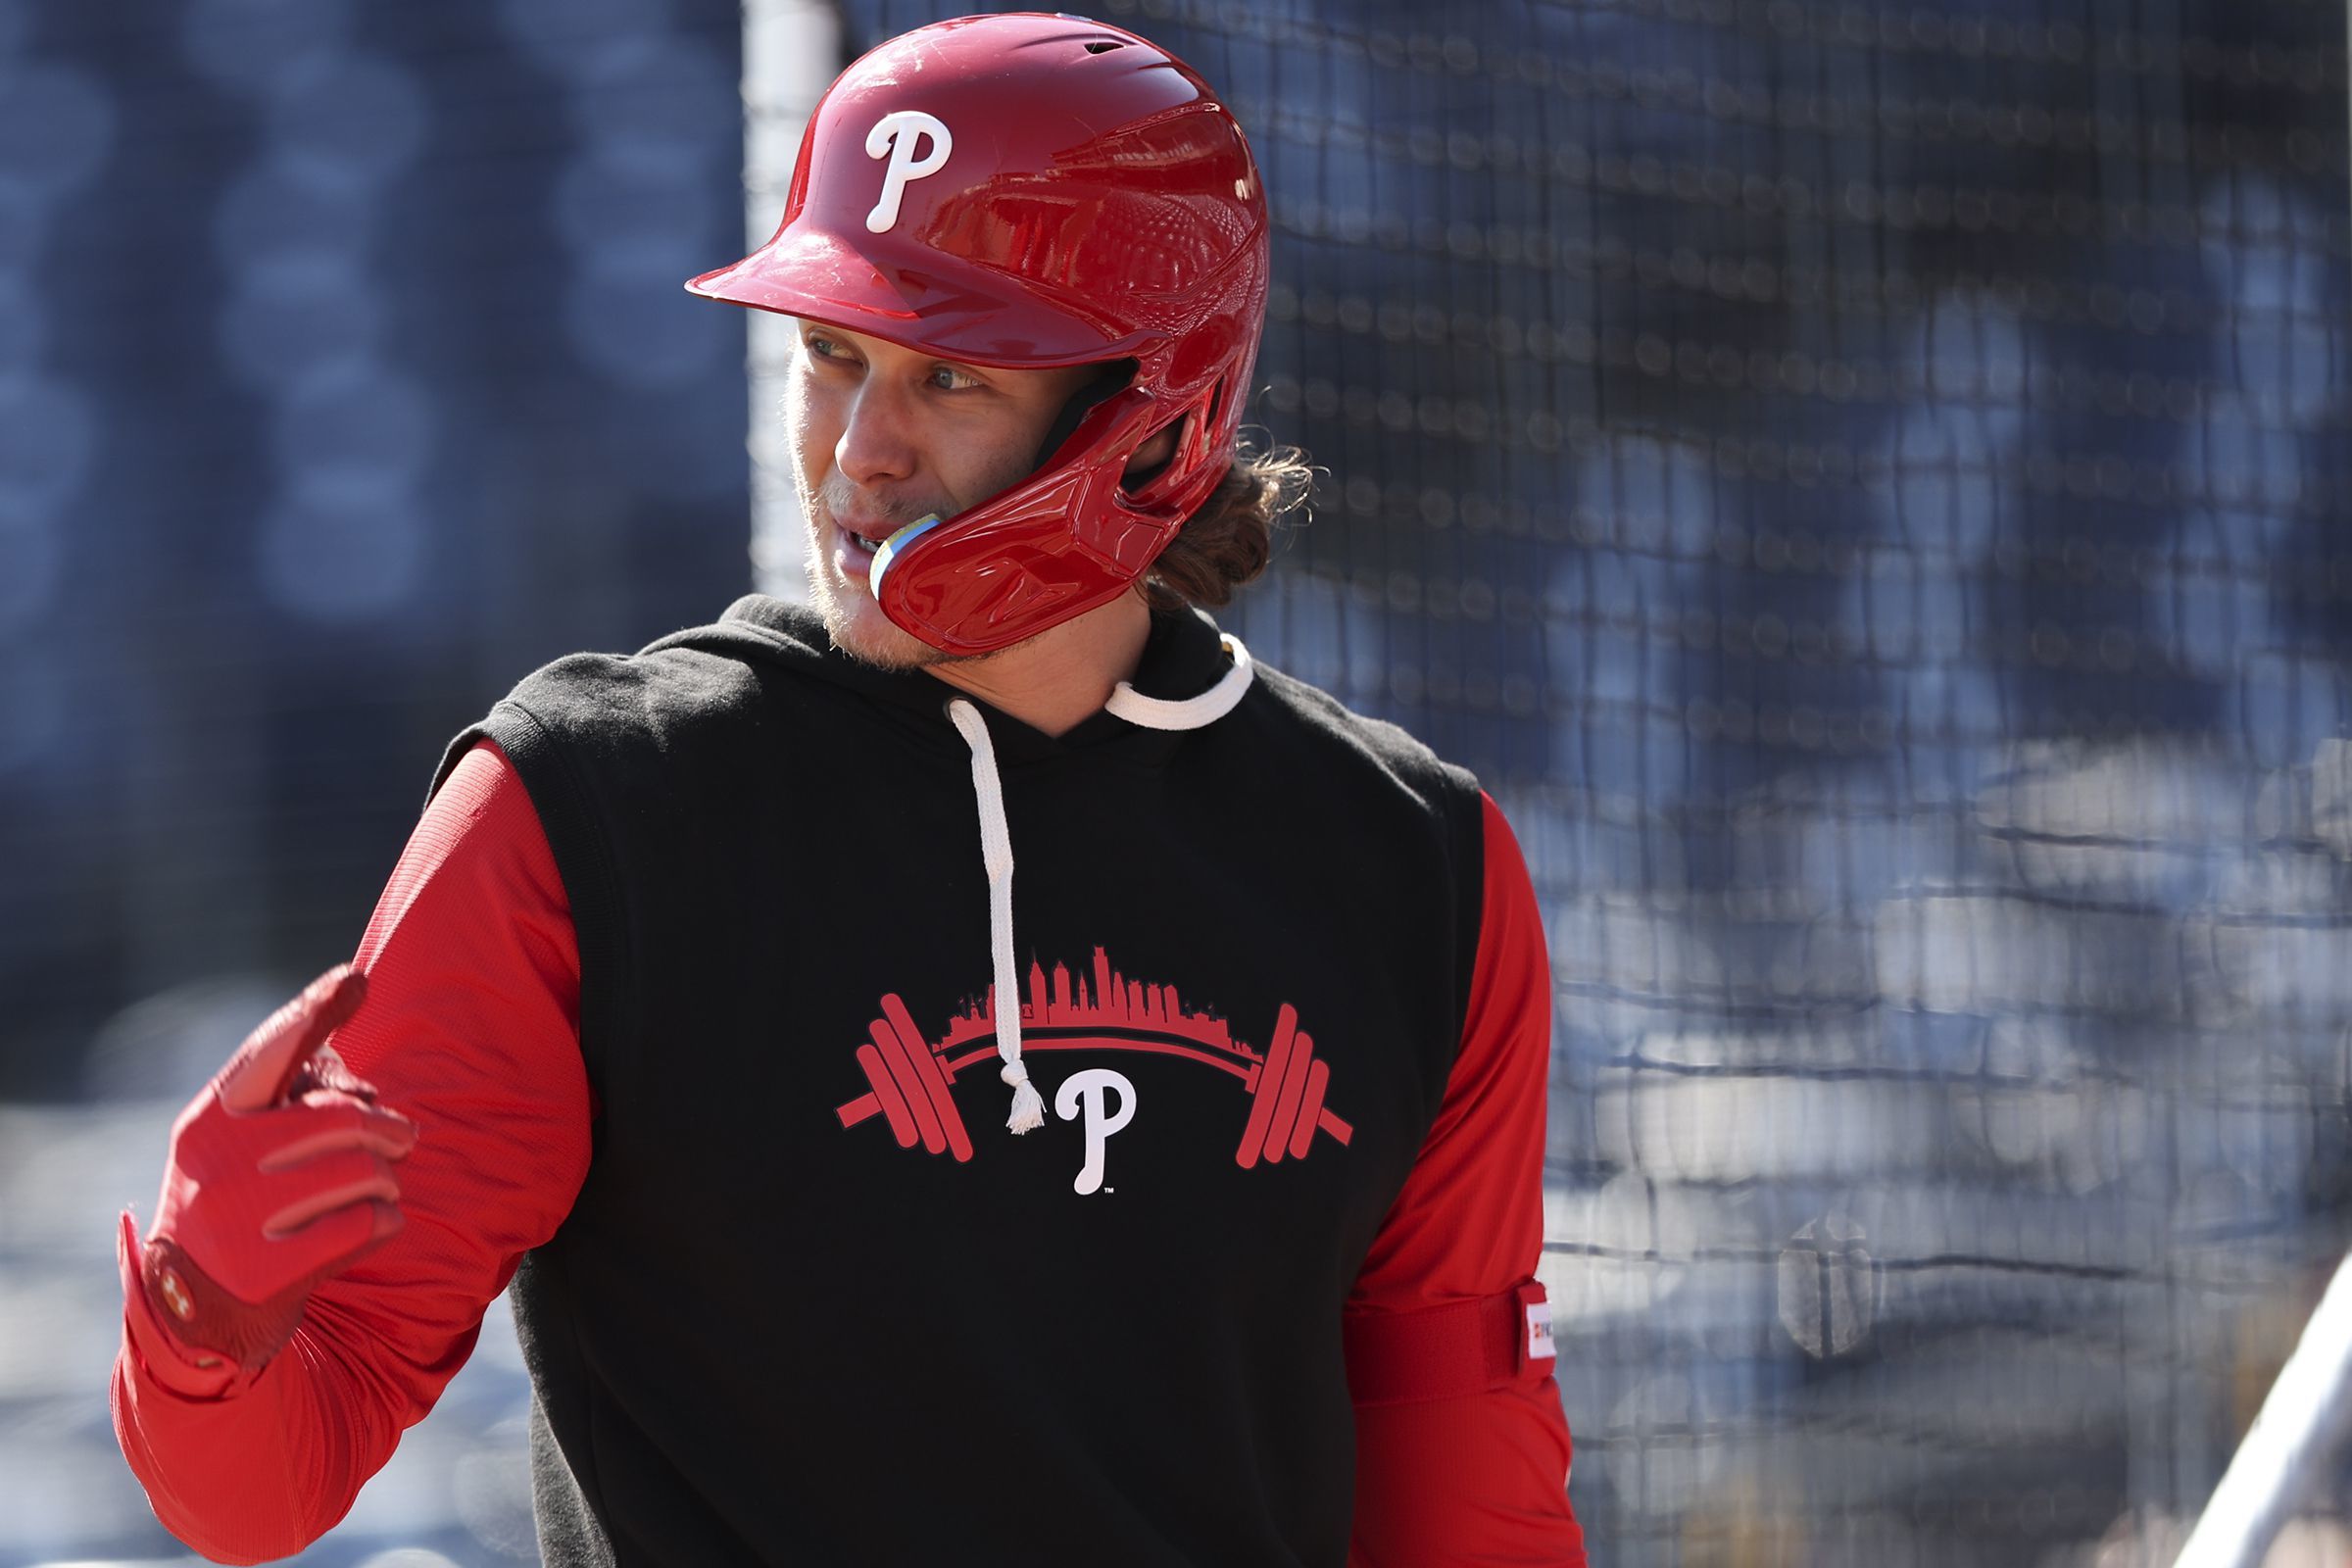 who should bat behind bryce harper? again, it’s a key question for the phillies.